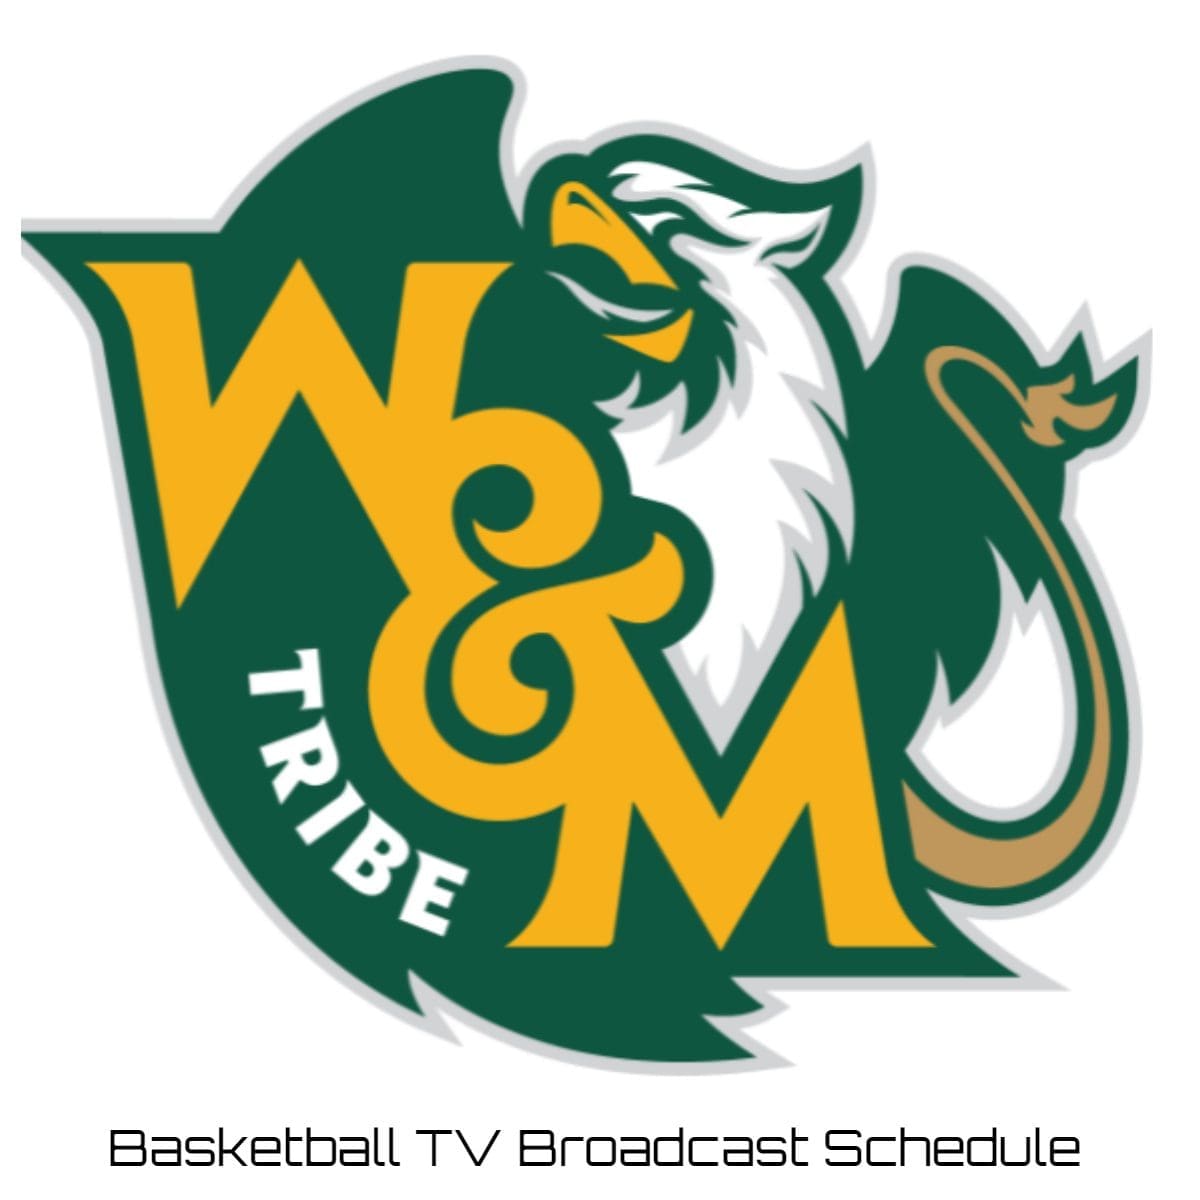 William & Mary Tribe Basketball TV Broadcast Schedule